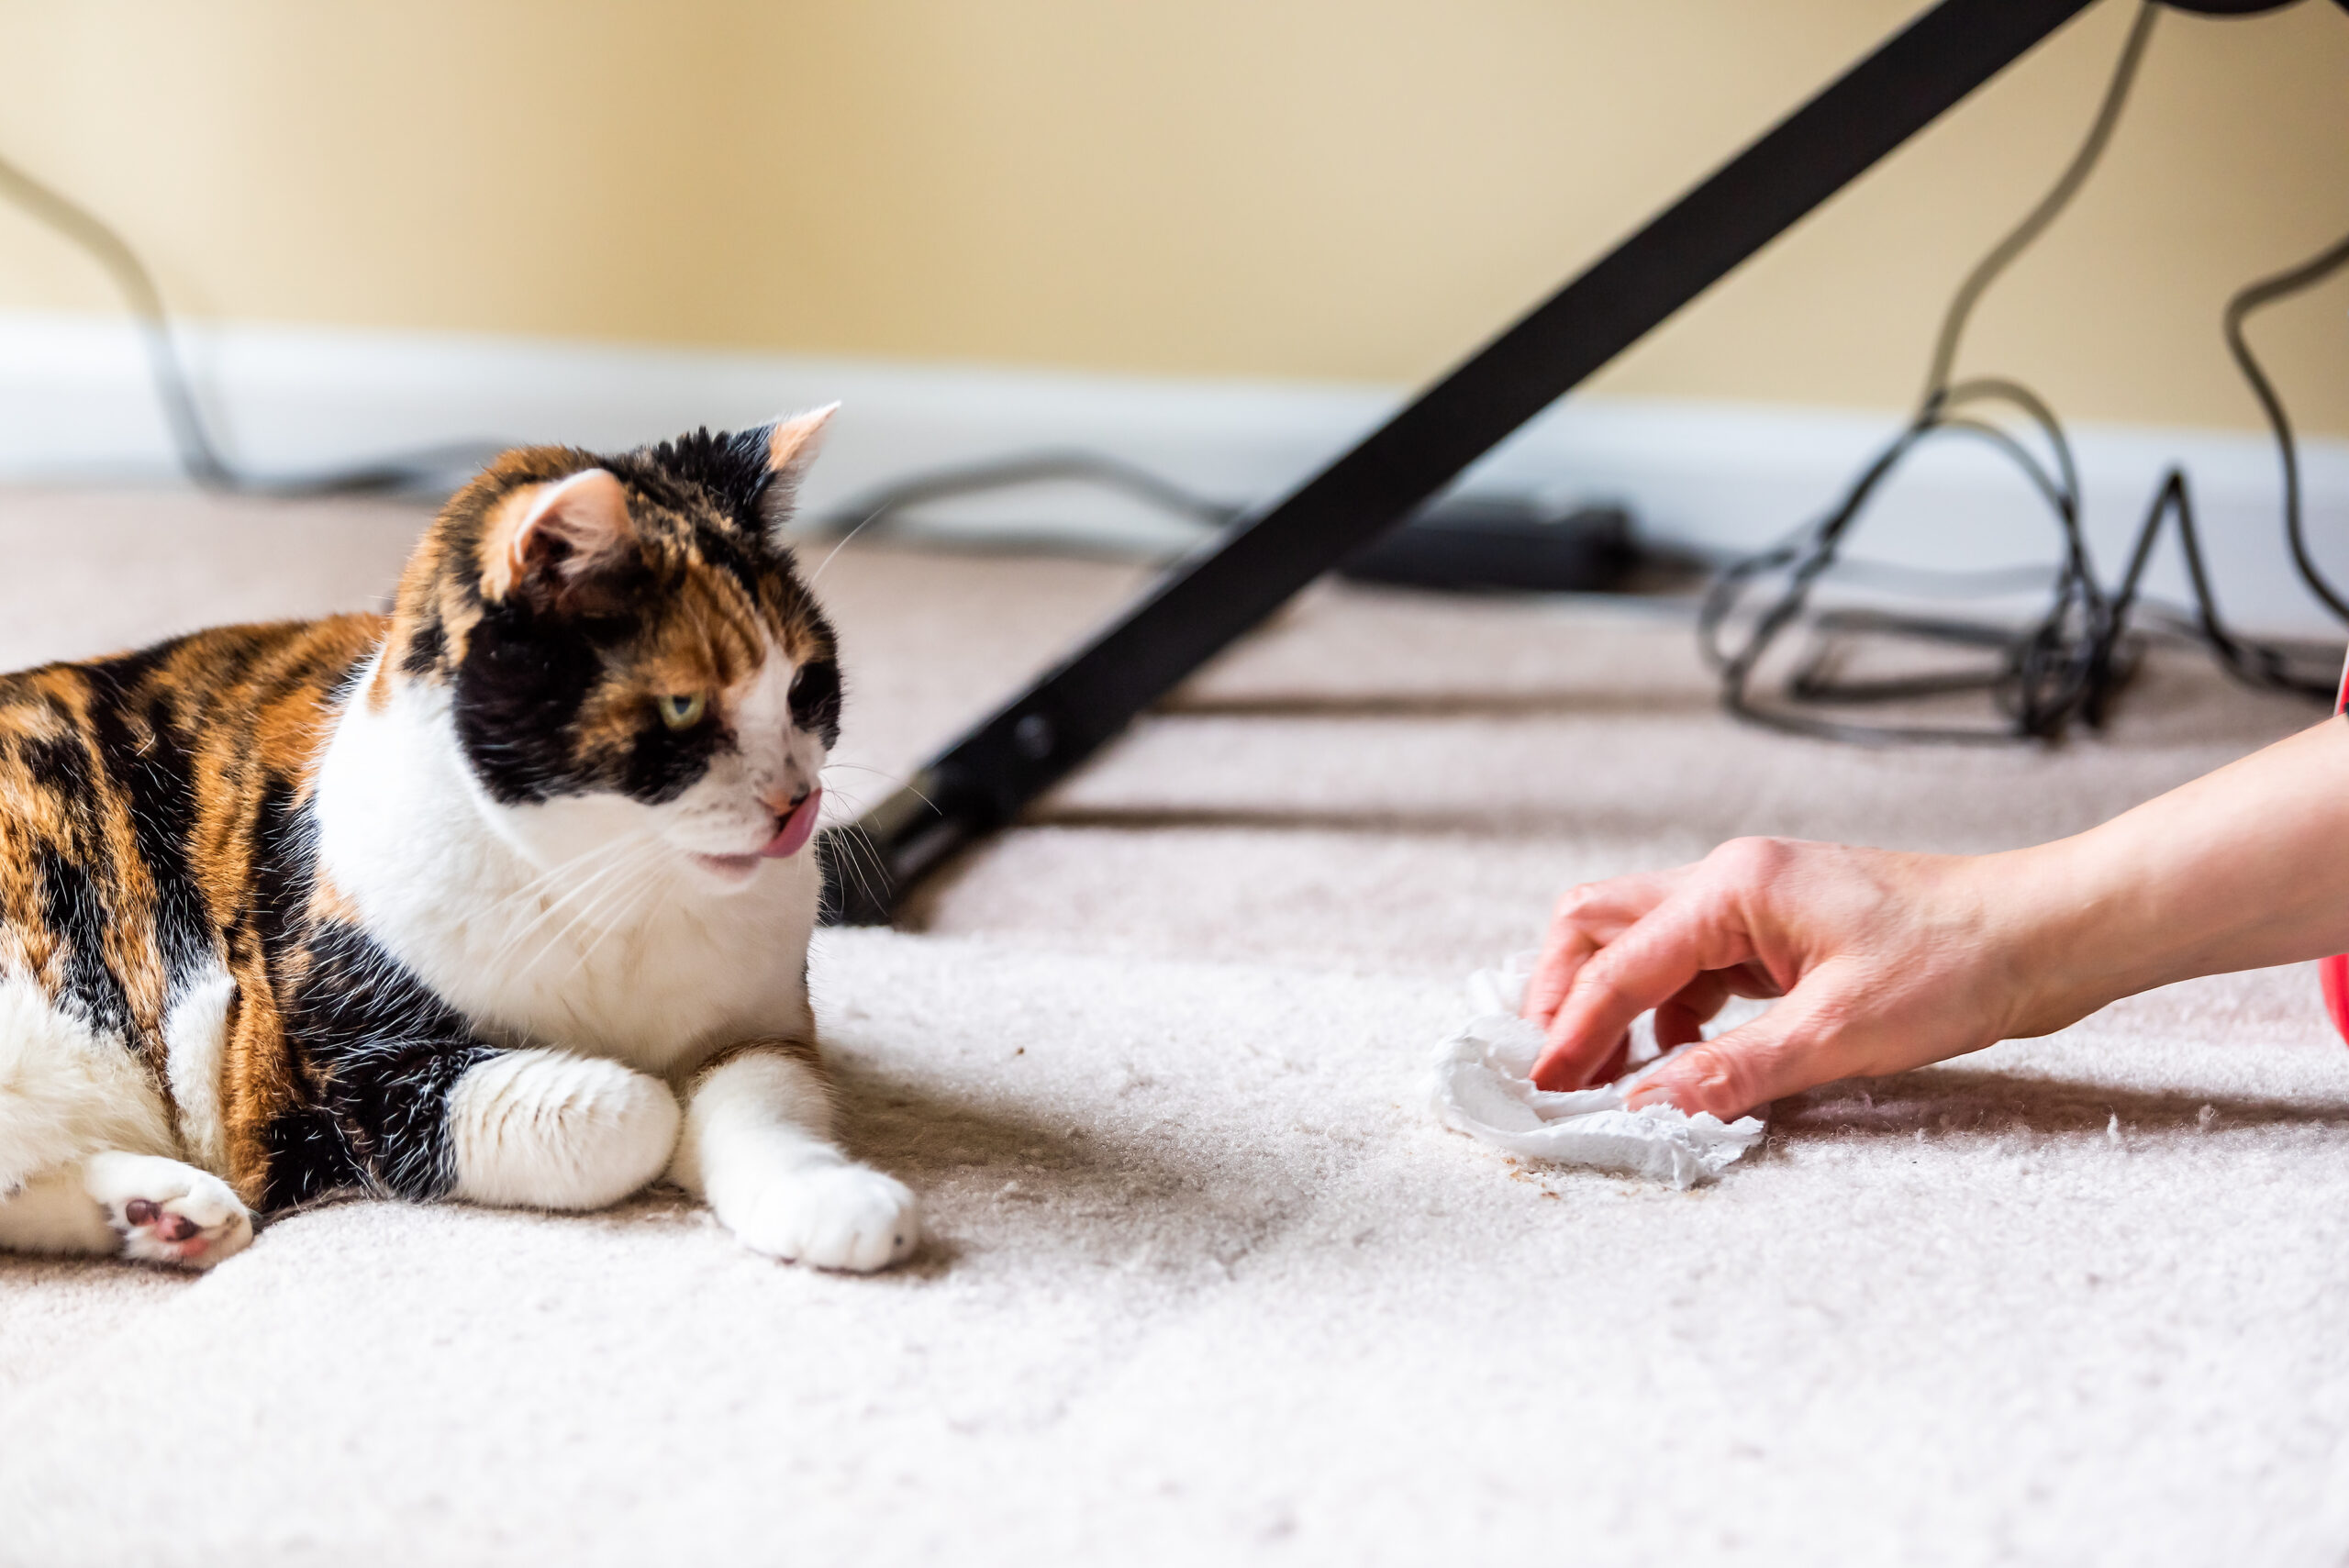 How To Remove Cat Urine From Carpet